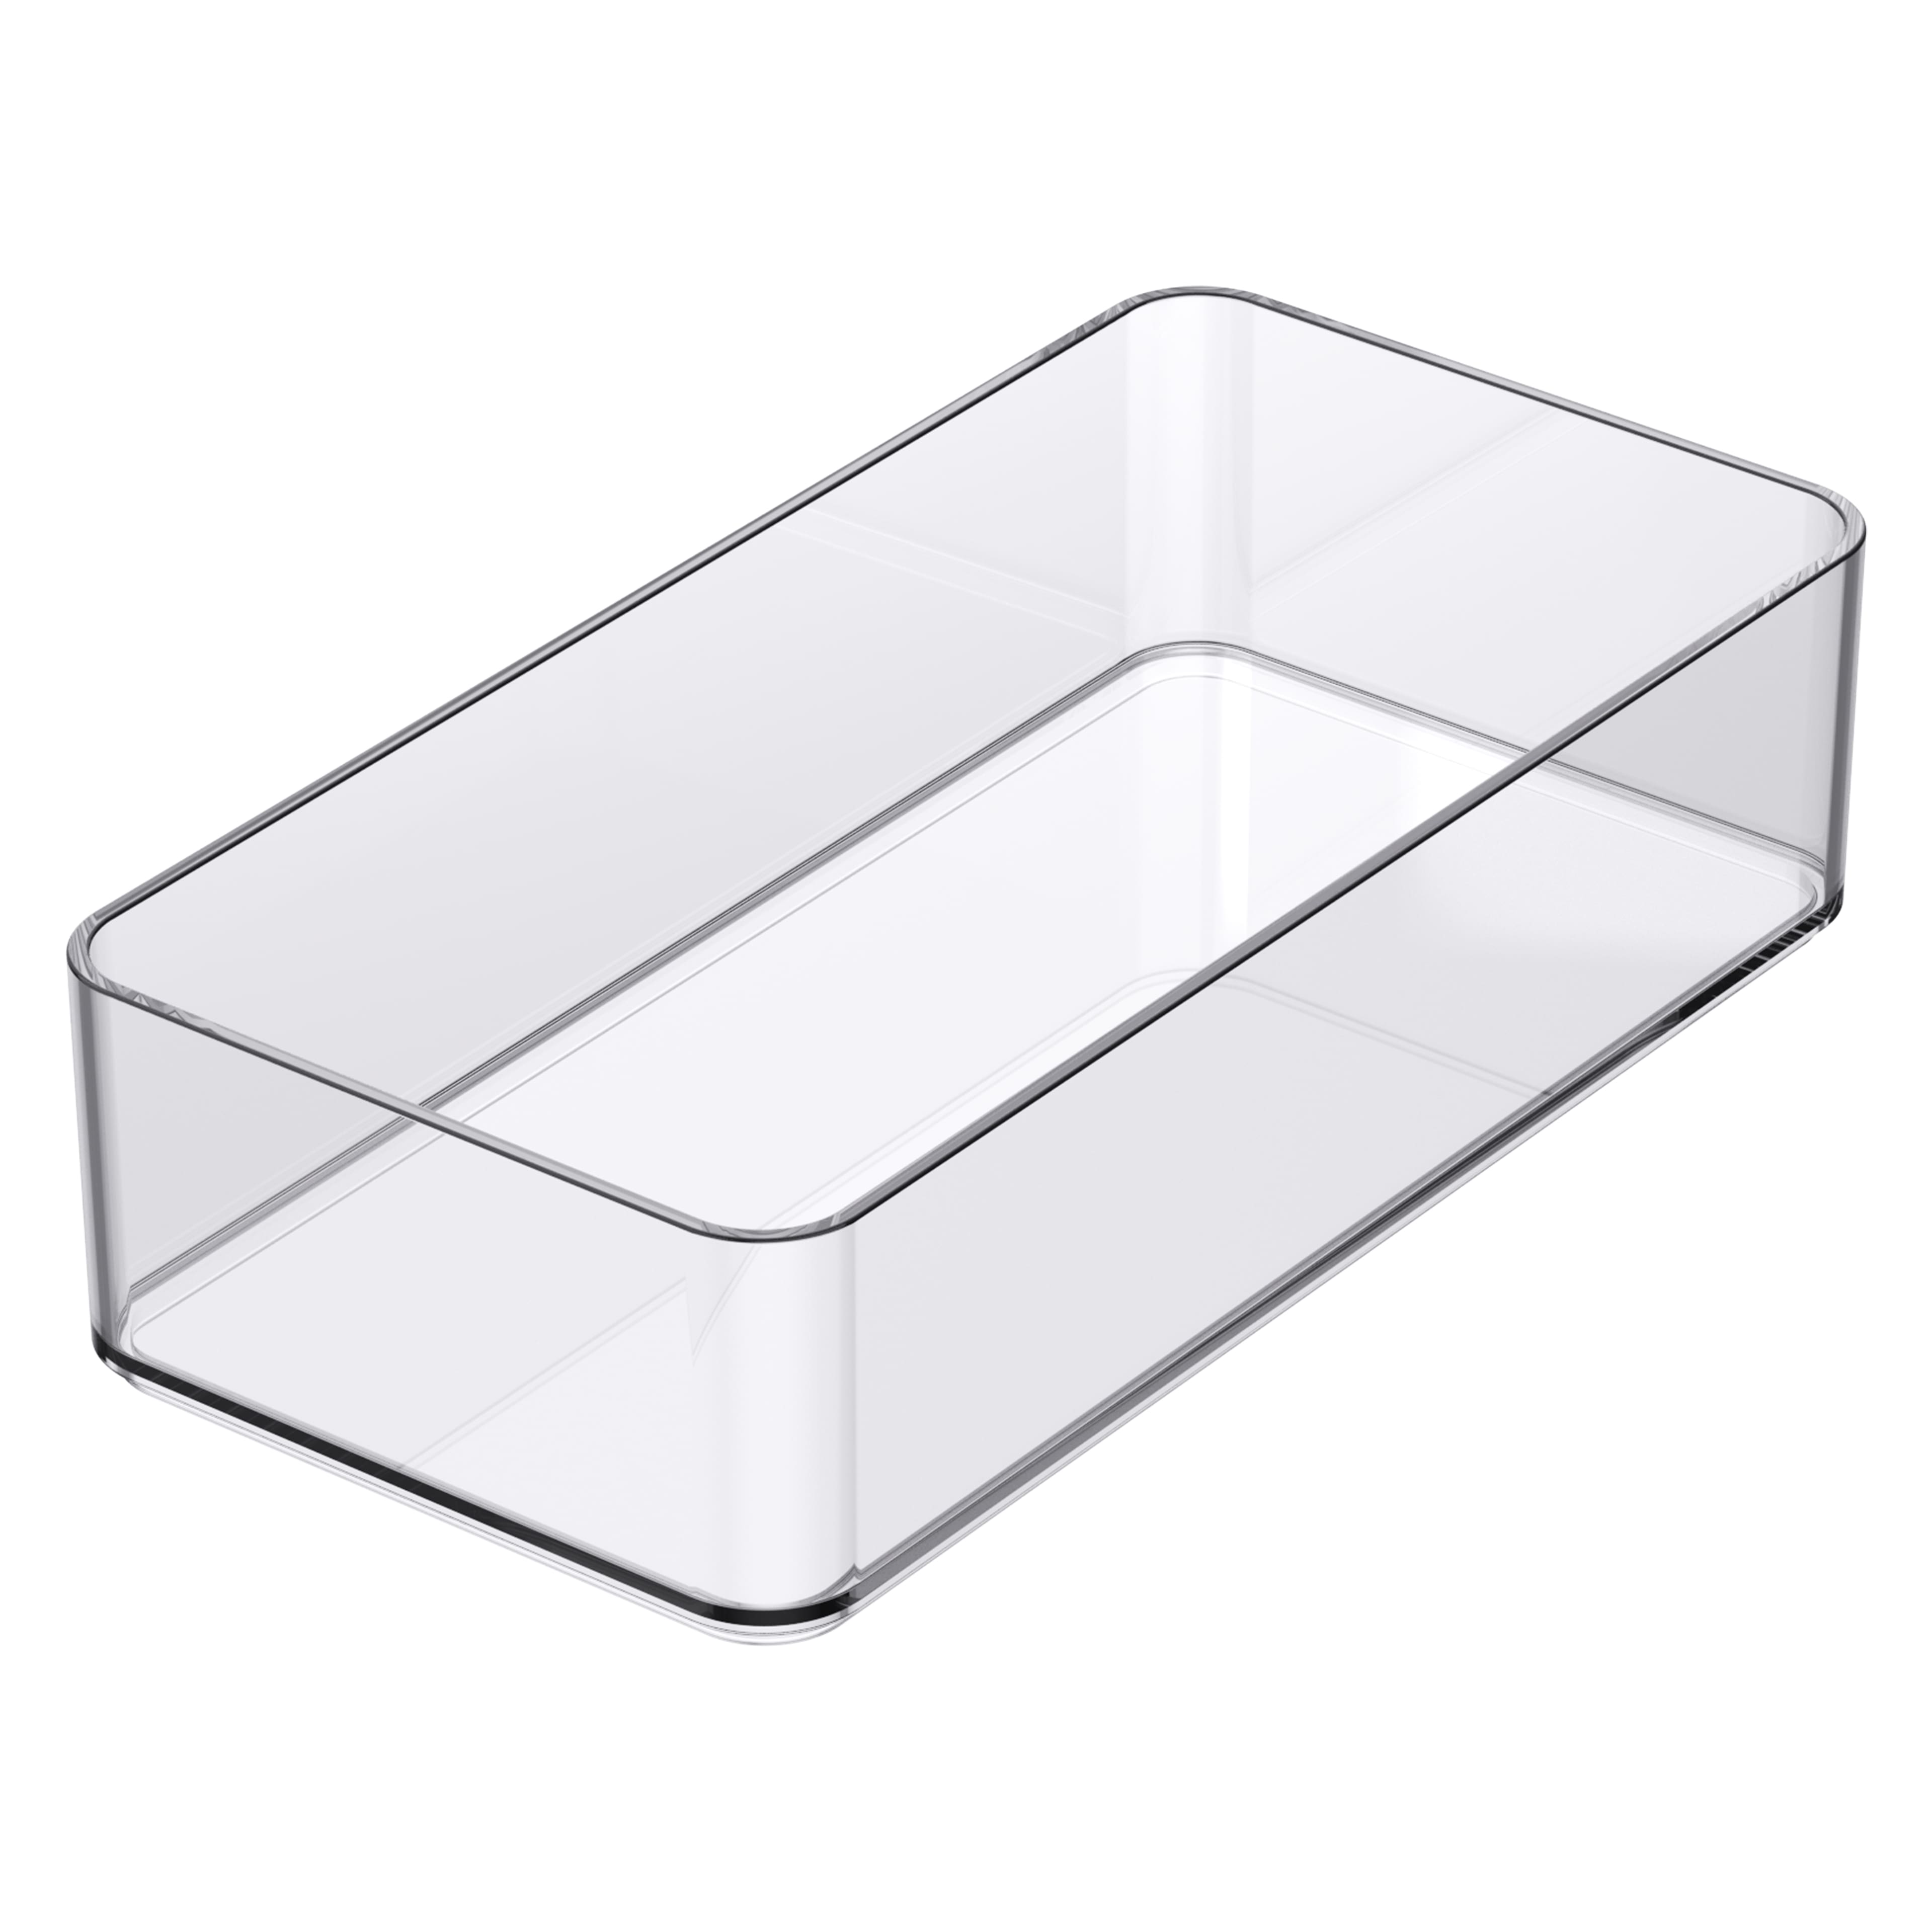 8 X 4 Clear Stacking Storage Tray By Simply Tidy | Michaels